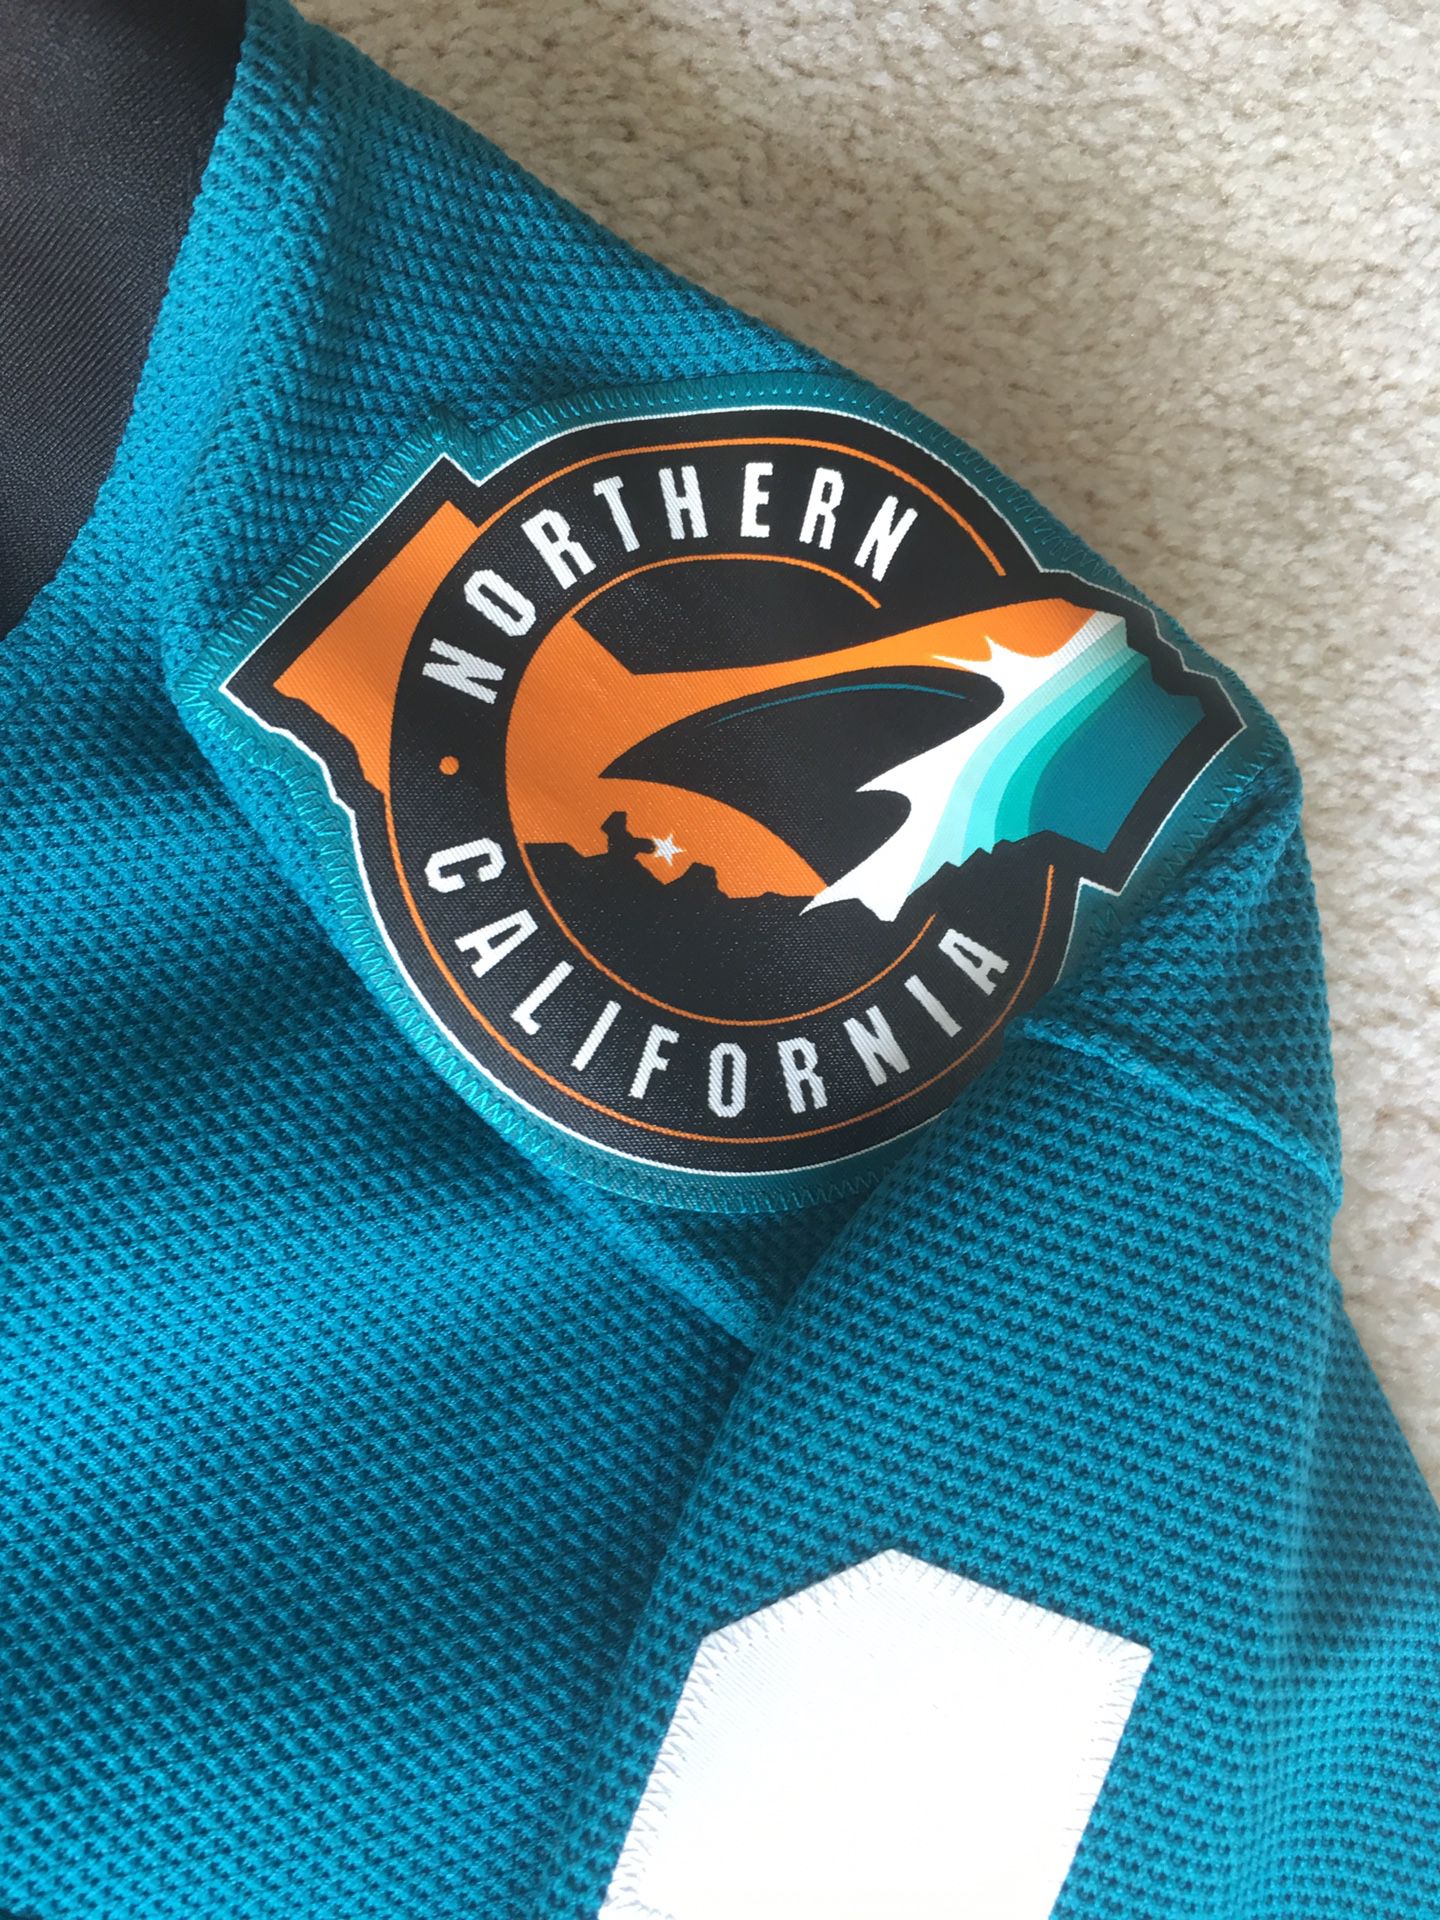 Sharks Store on X: 2015 Stadium Series Jersey NOW AVAILABLE in the Sharks  Store! #SJSharks  / X